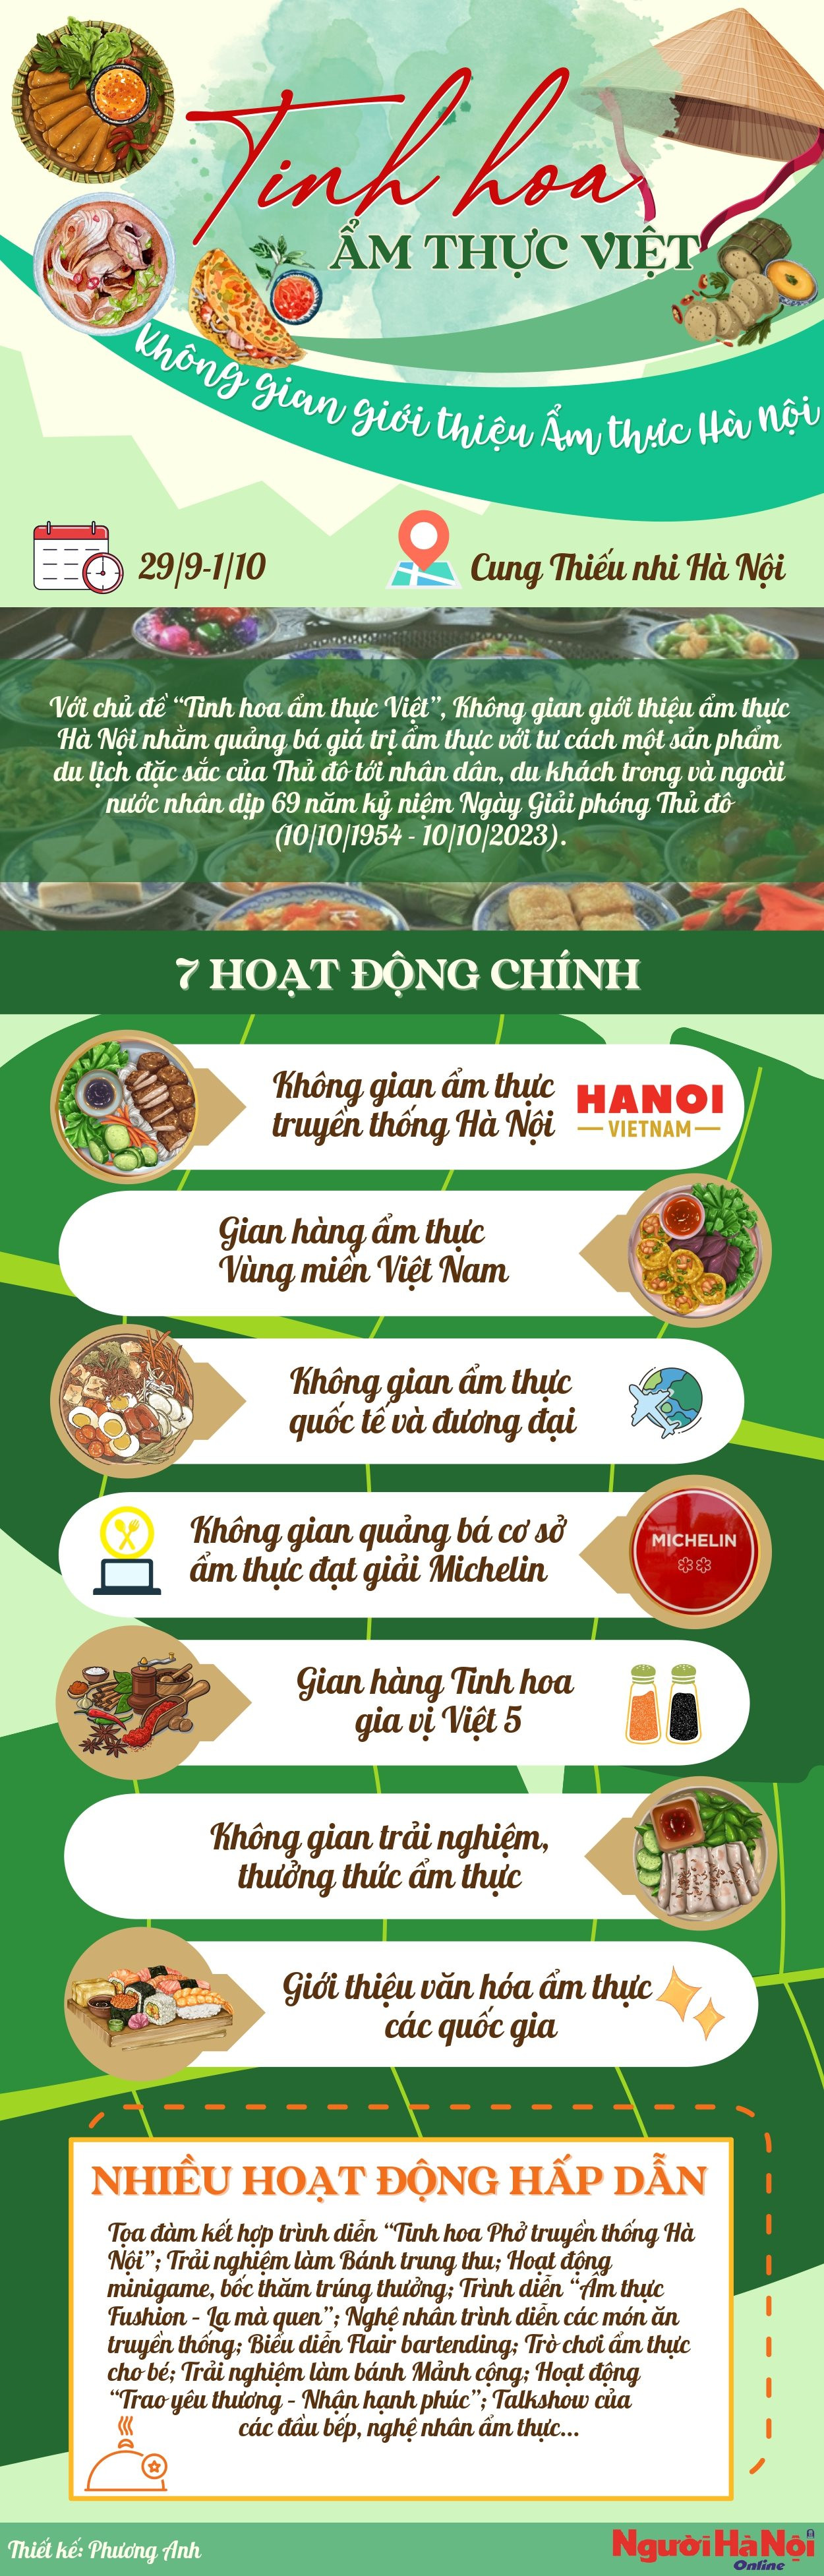 green-and-brown-illustrative-filipino-food-facts-infographics-800-2500-px-_page-0001-2-.jpg